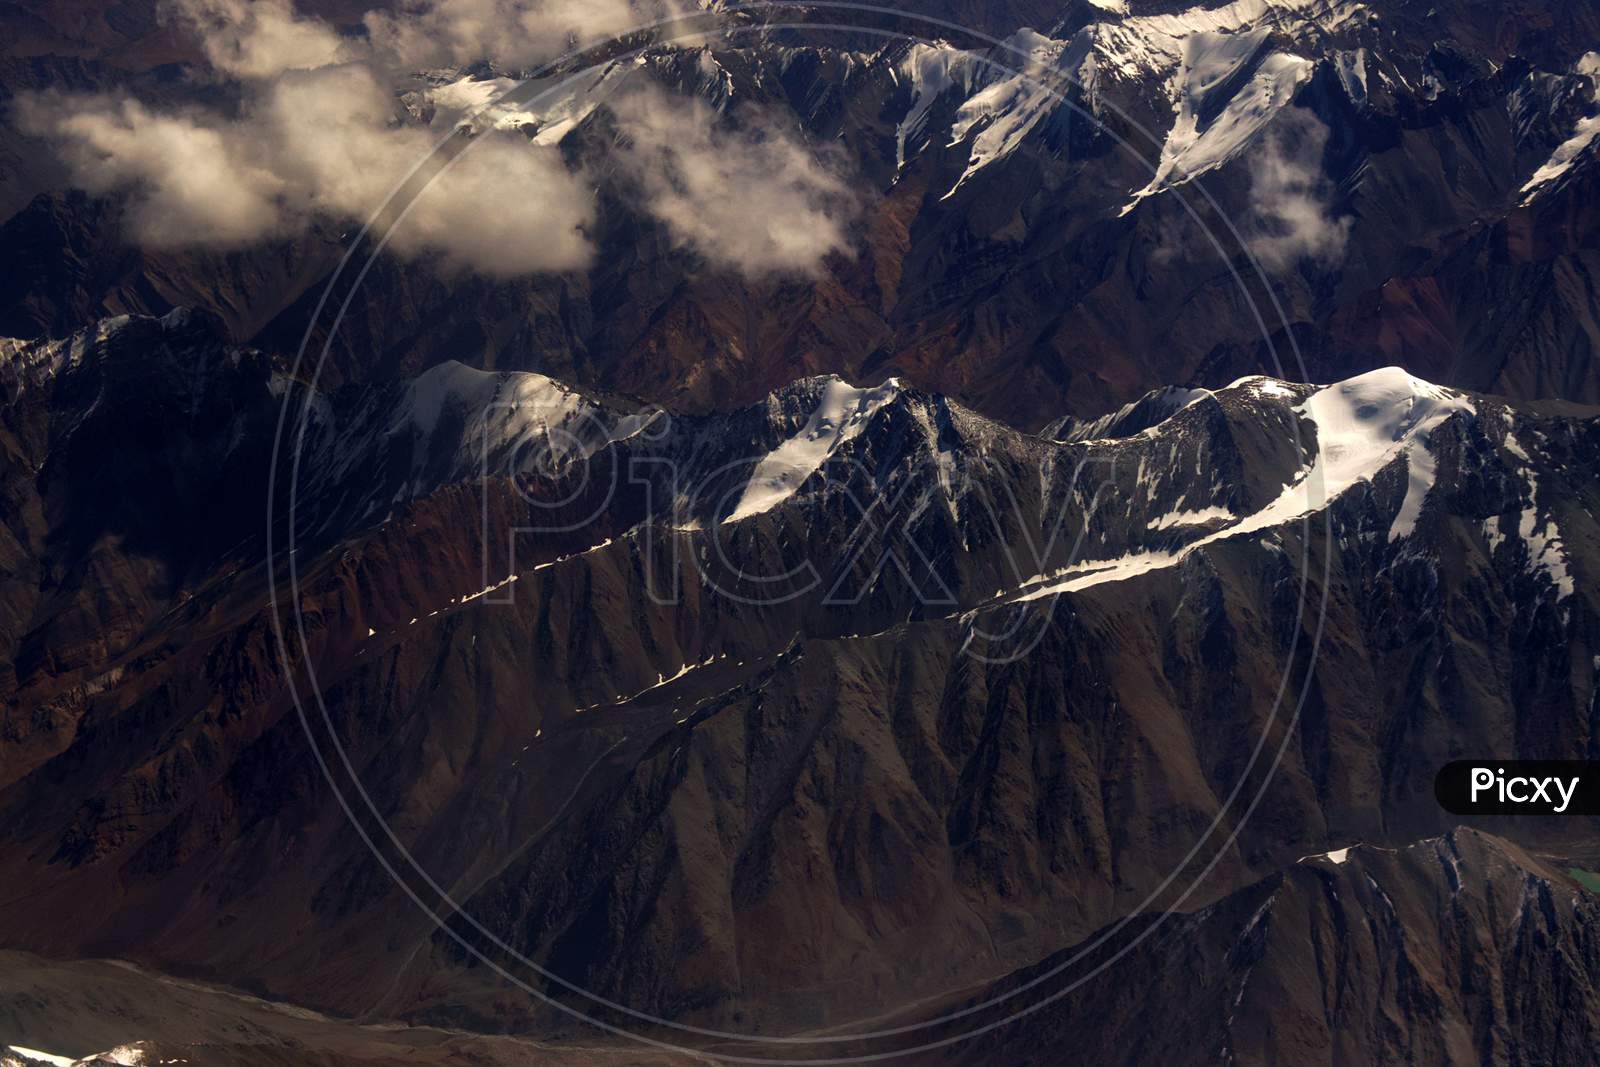 Snow Terrains With Valley Passes Aerial View At Ladakh, Leh